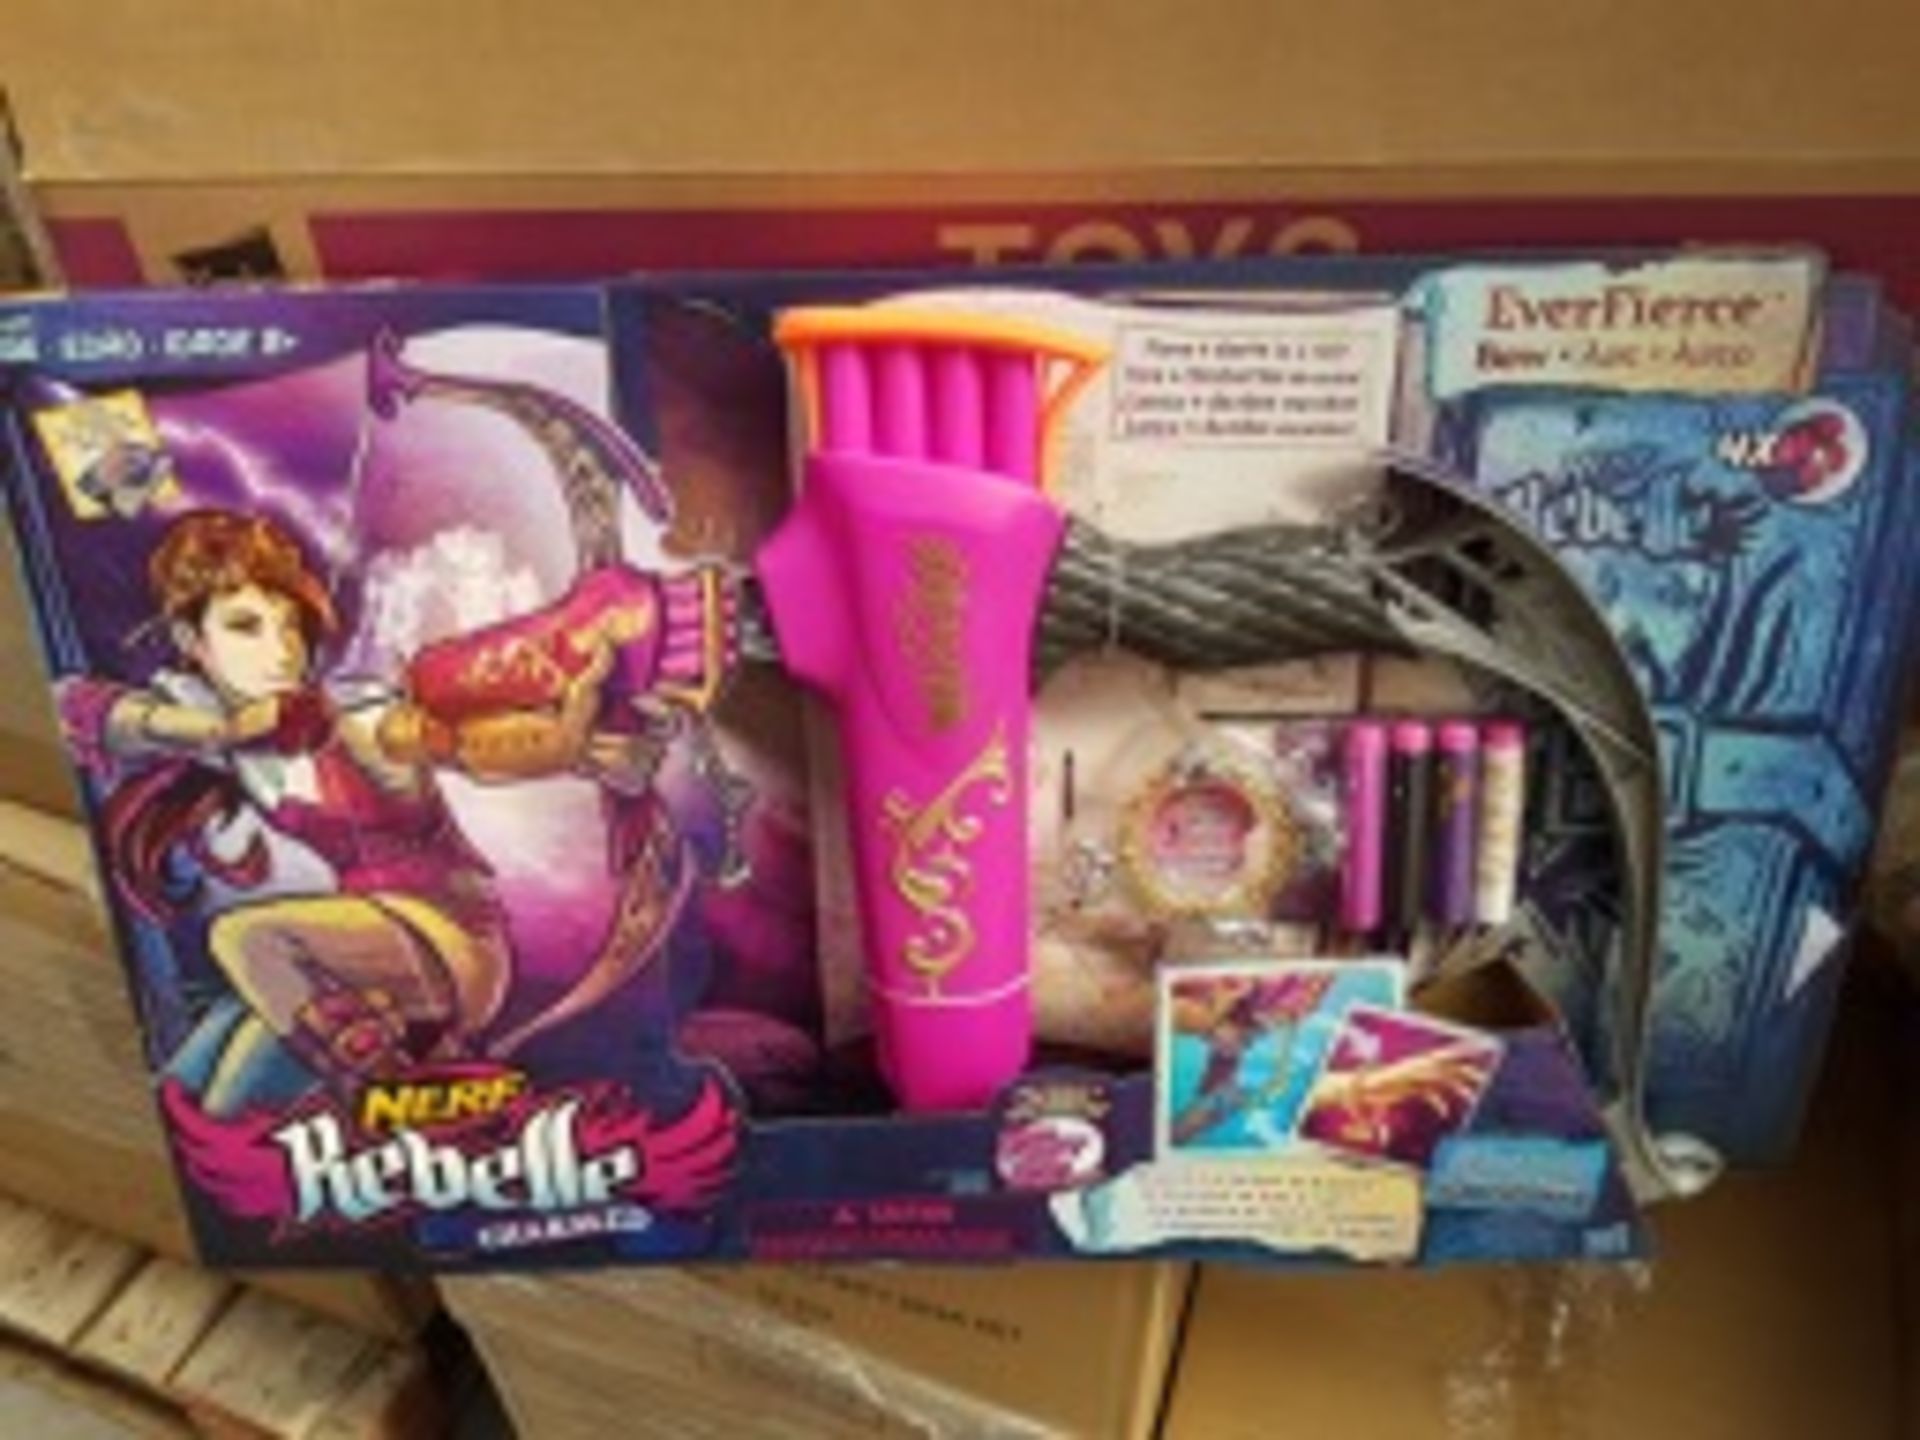 PALLET TO CONTAIN 48 x Brand New Nerf Rebelle Charmed Everfierce Bow - Complete with 3 charms & 4